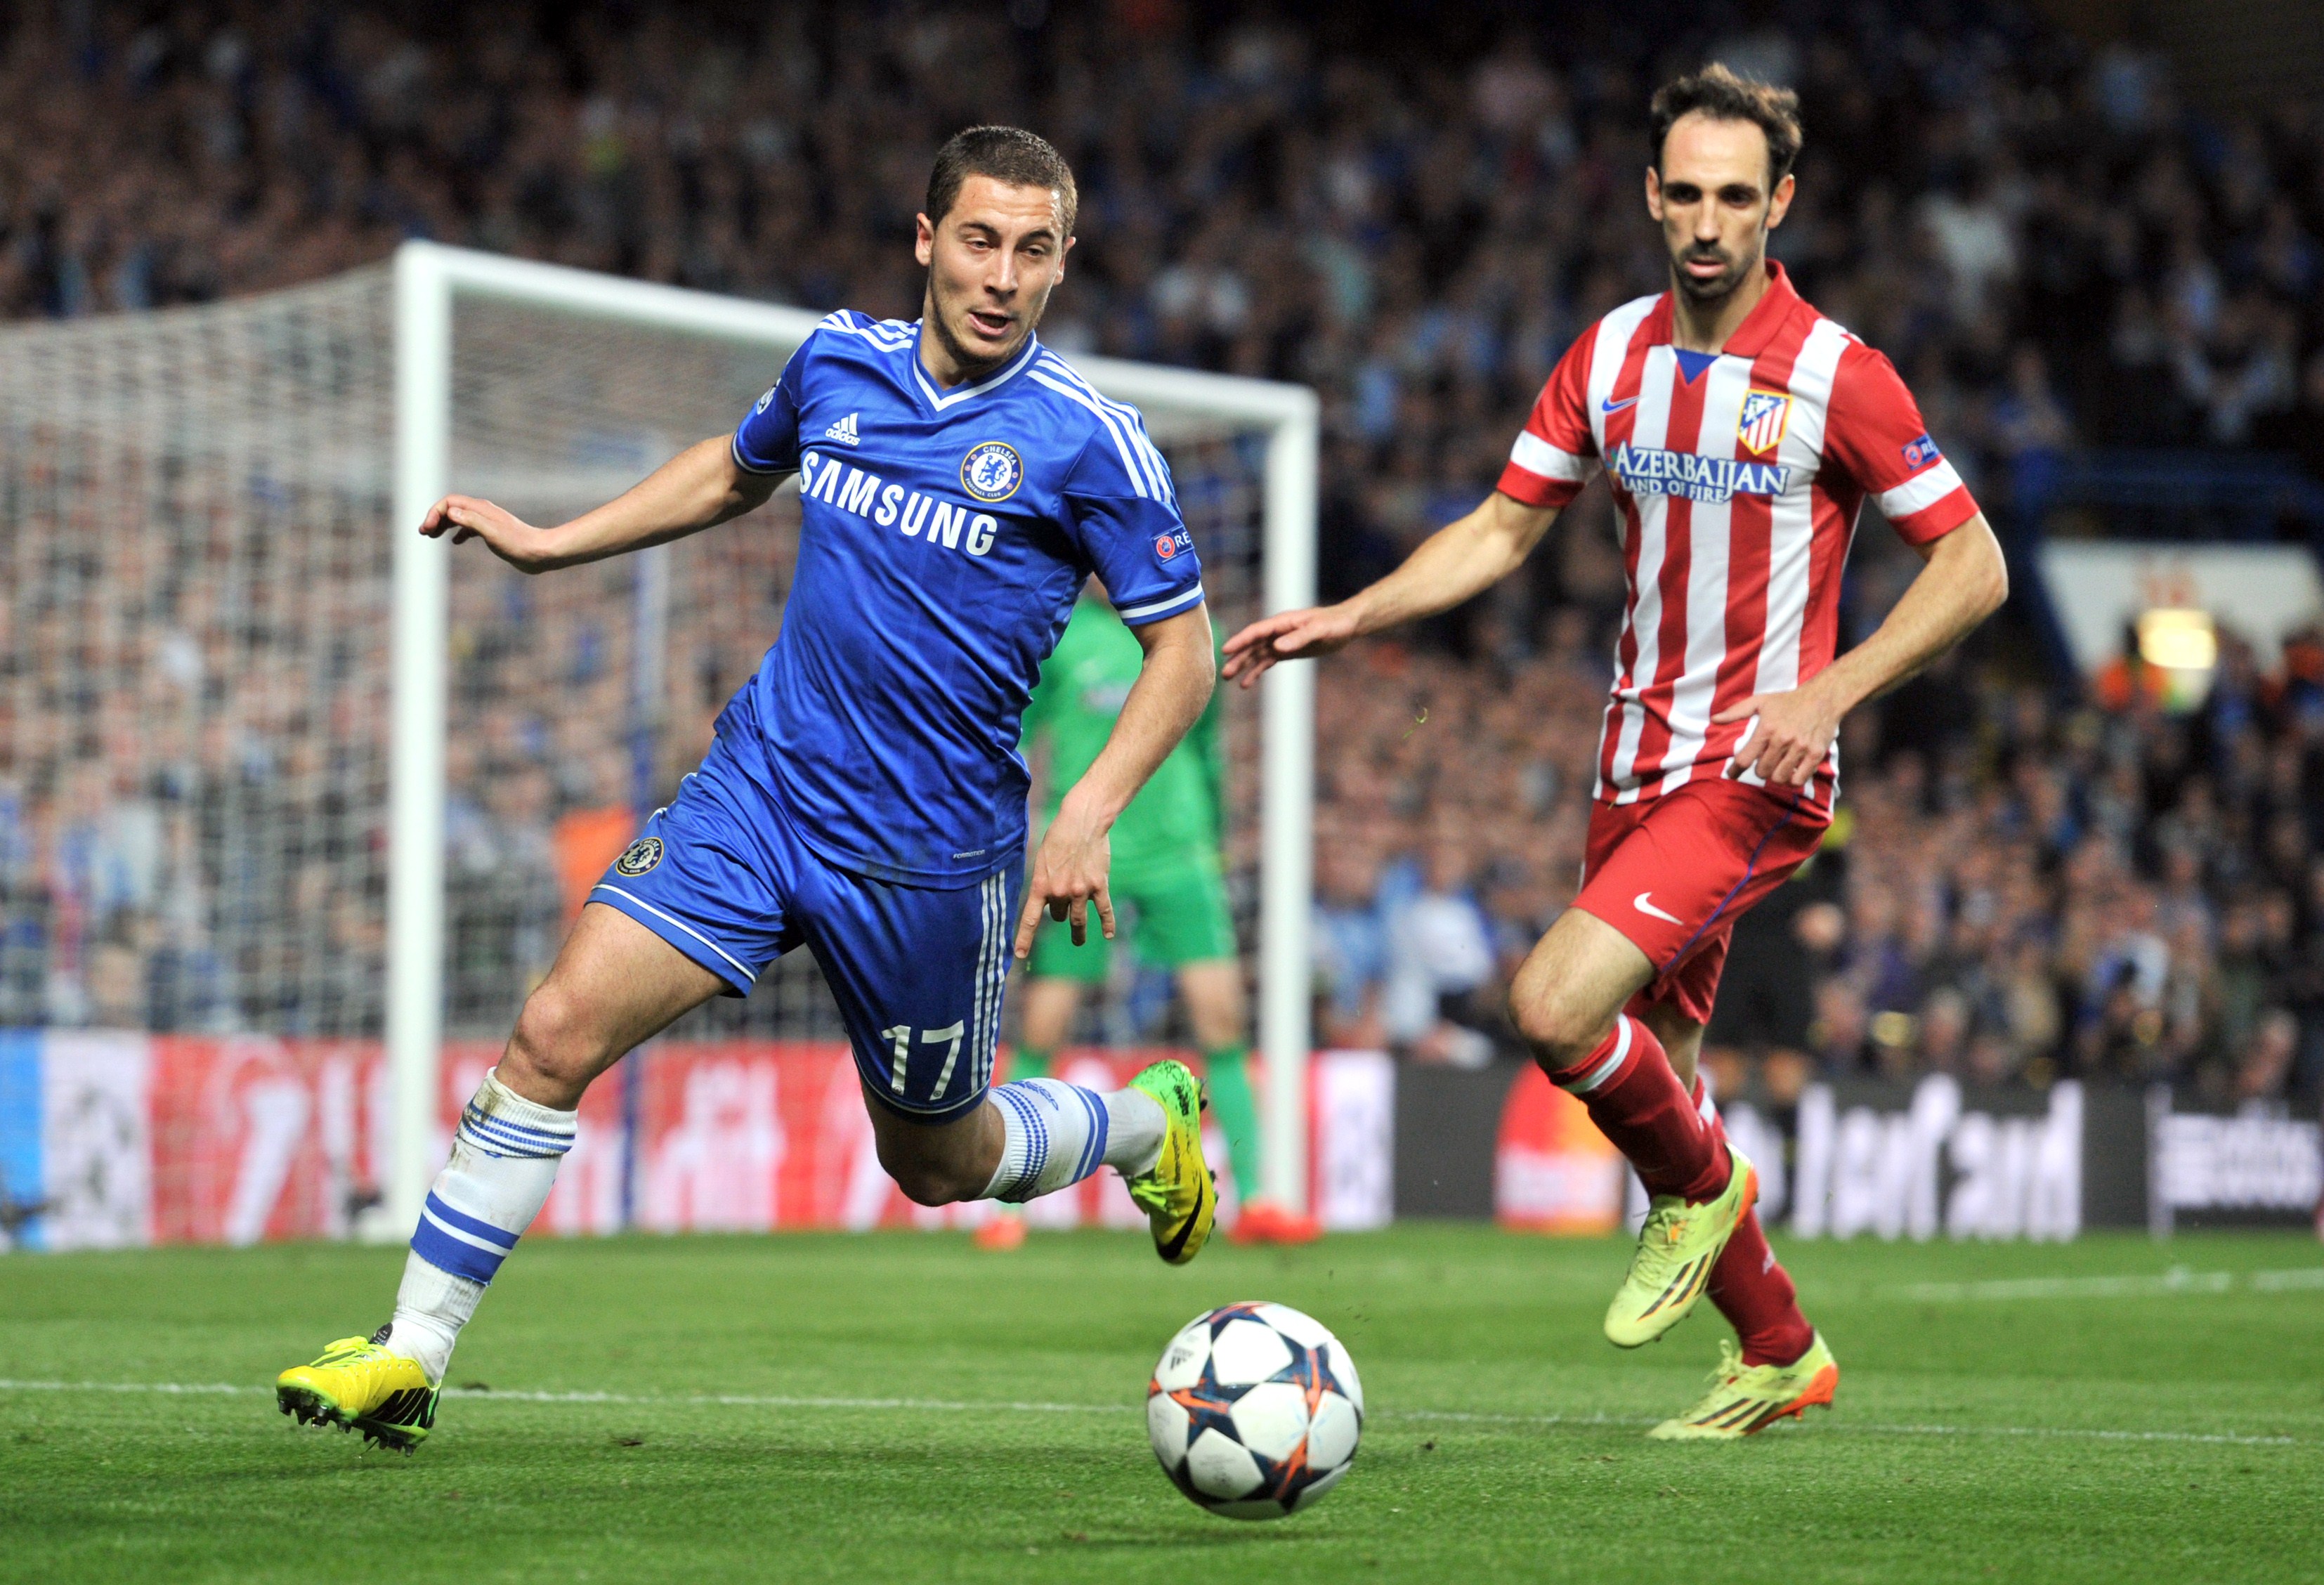 Chelsea's Belgian midfielder Eden Hazard (L) challenges Atletico Madrid's Spanish midfielder Juanfran during the UEFA Champions League semi-final second leg football match between Chelsea and Atletico Madrid at Stamford Bridge in London on April 30, 2014. AFP PHOTO / GLYN KIRK        (Photo credit should read GLYN KIRK/AFP/Getty Images)